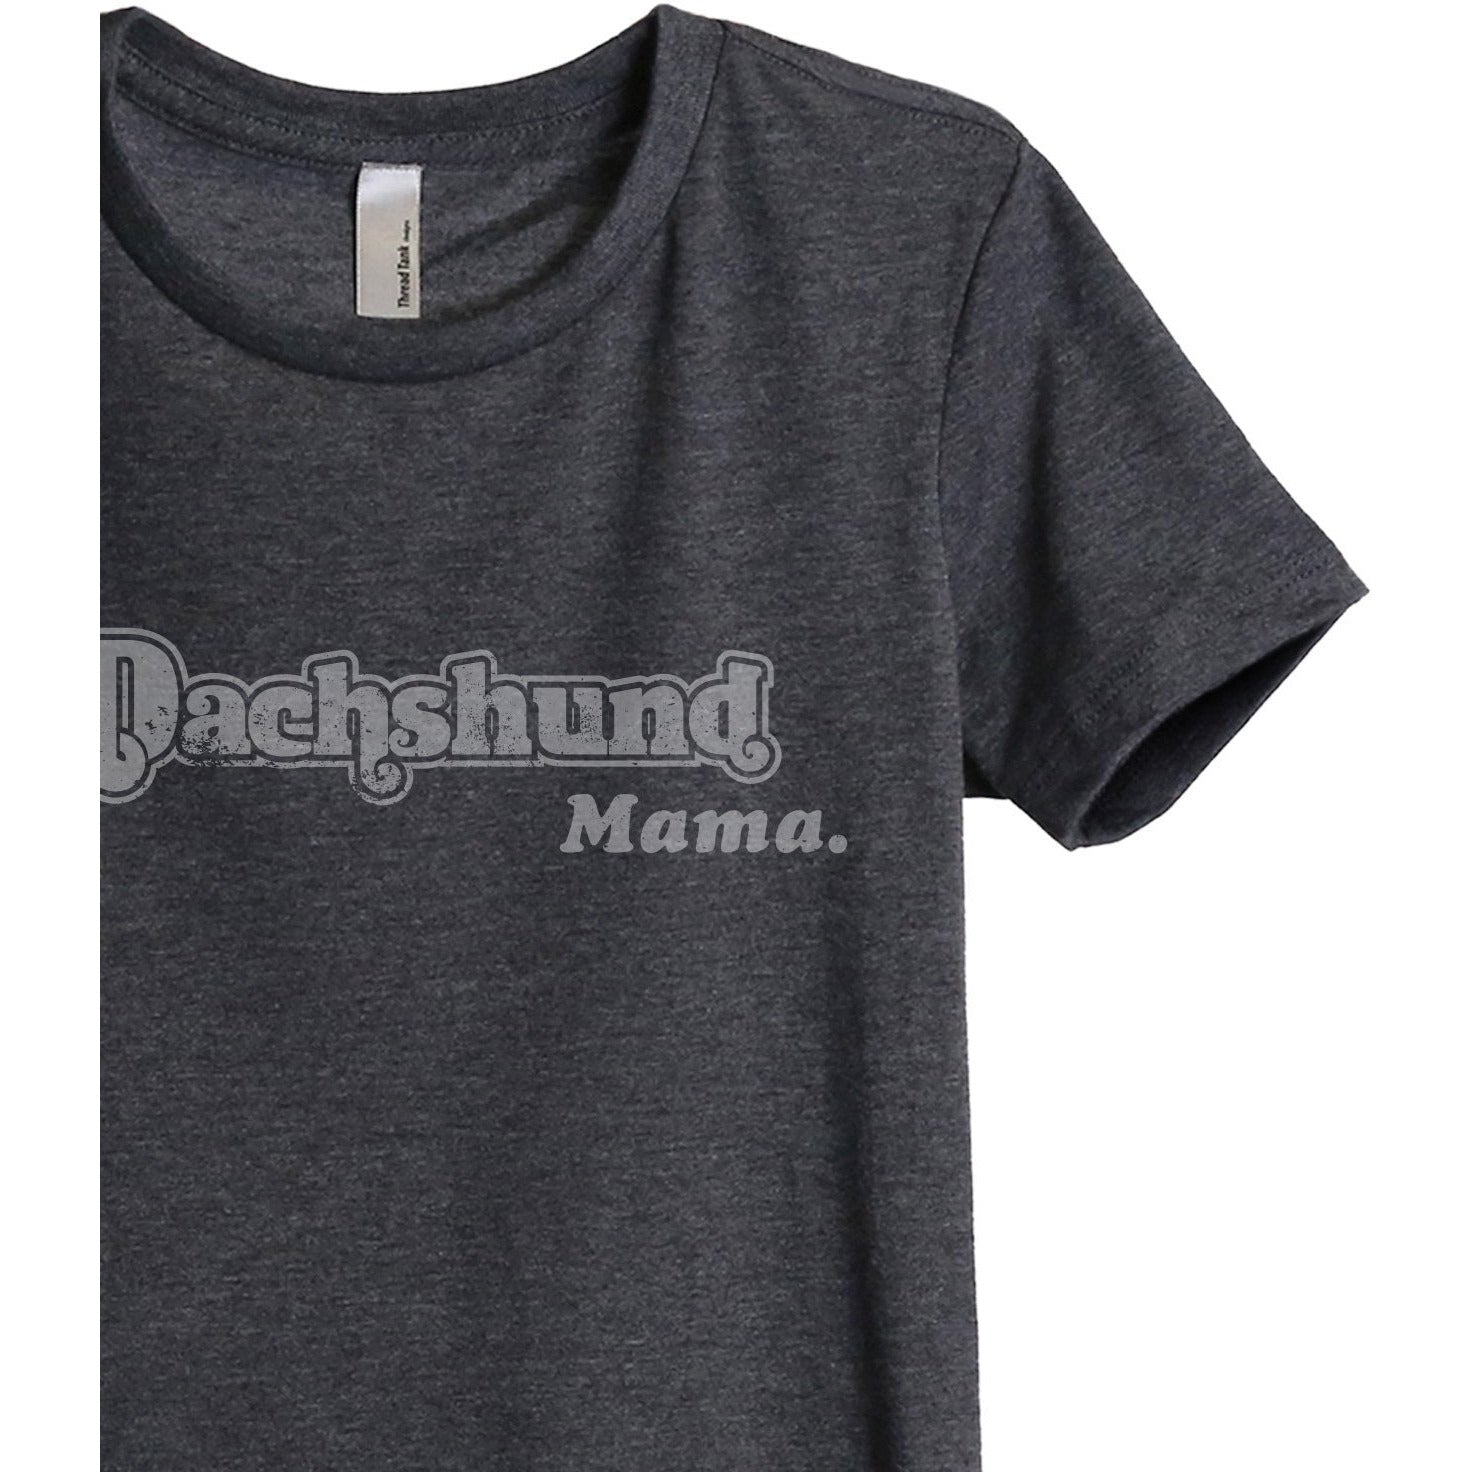 Dachshund Mama Women's Relaxed Crewneck T-Shirt Top Tee Charcoal Grey Zoom Details